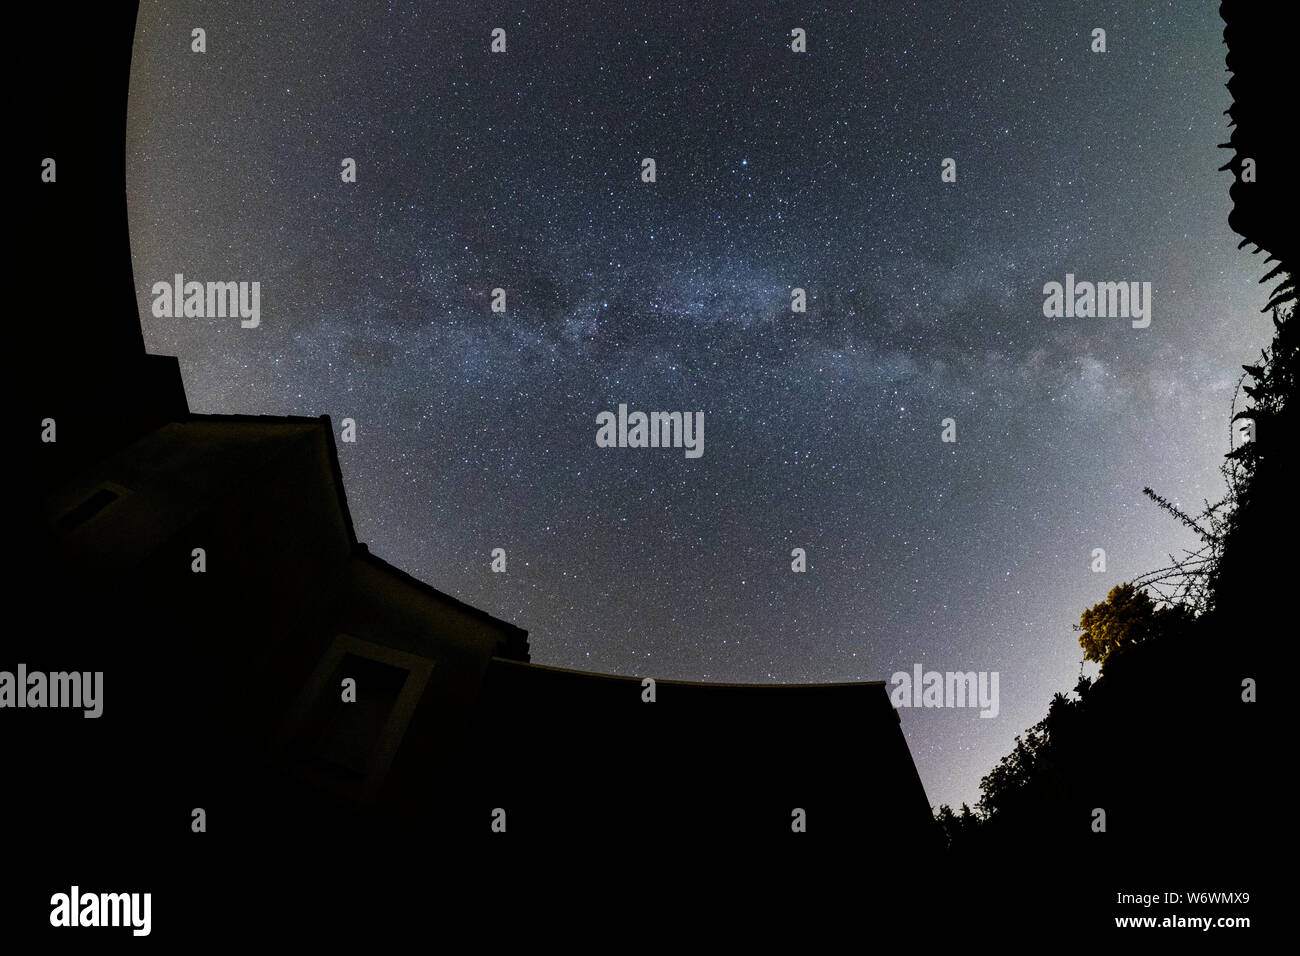 Sablet, The Vaucluse, France. 3rd August 2019. Clear dark skies in southern France show the Milky Way appearing brightly in the night sky above a village house. Credit: Malcolm Park/Alamy Live News. Stock Photo